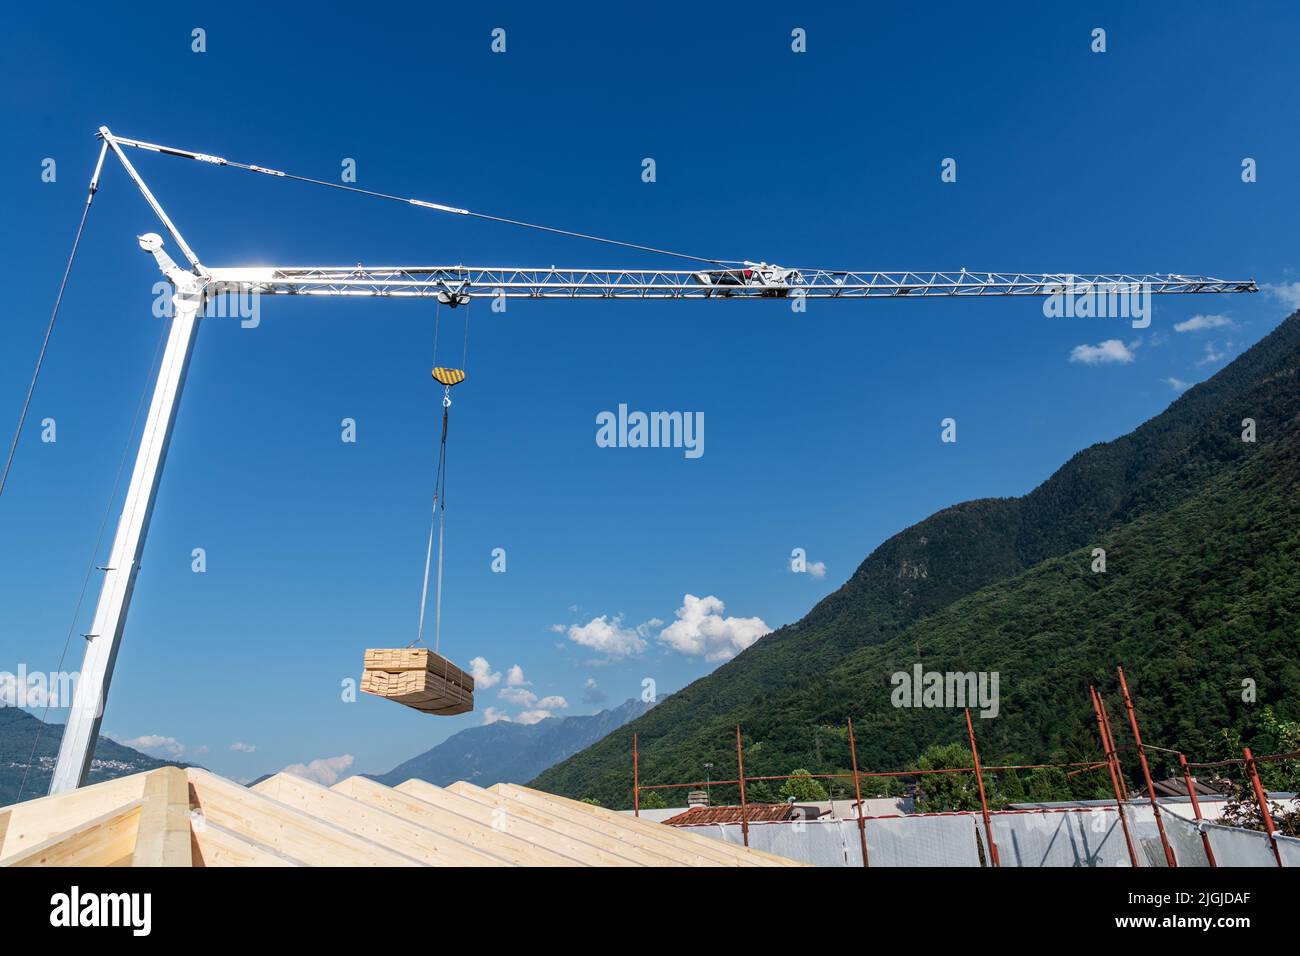 Construction crane  with hanging load of wood plank on a blue sky Stock Photo